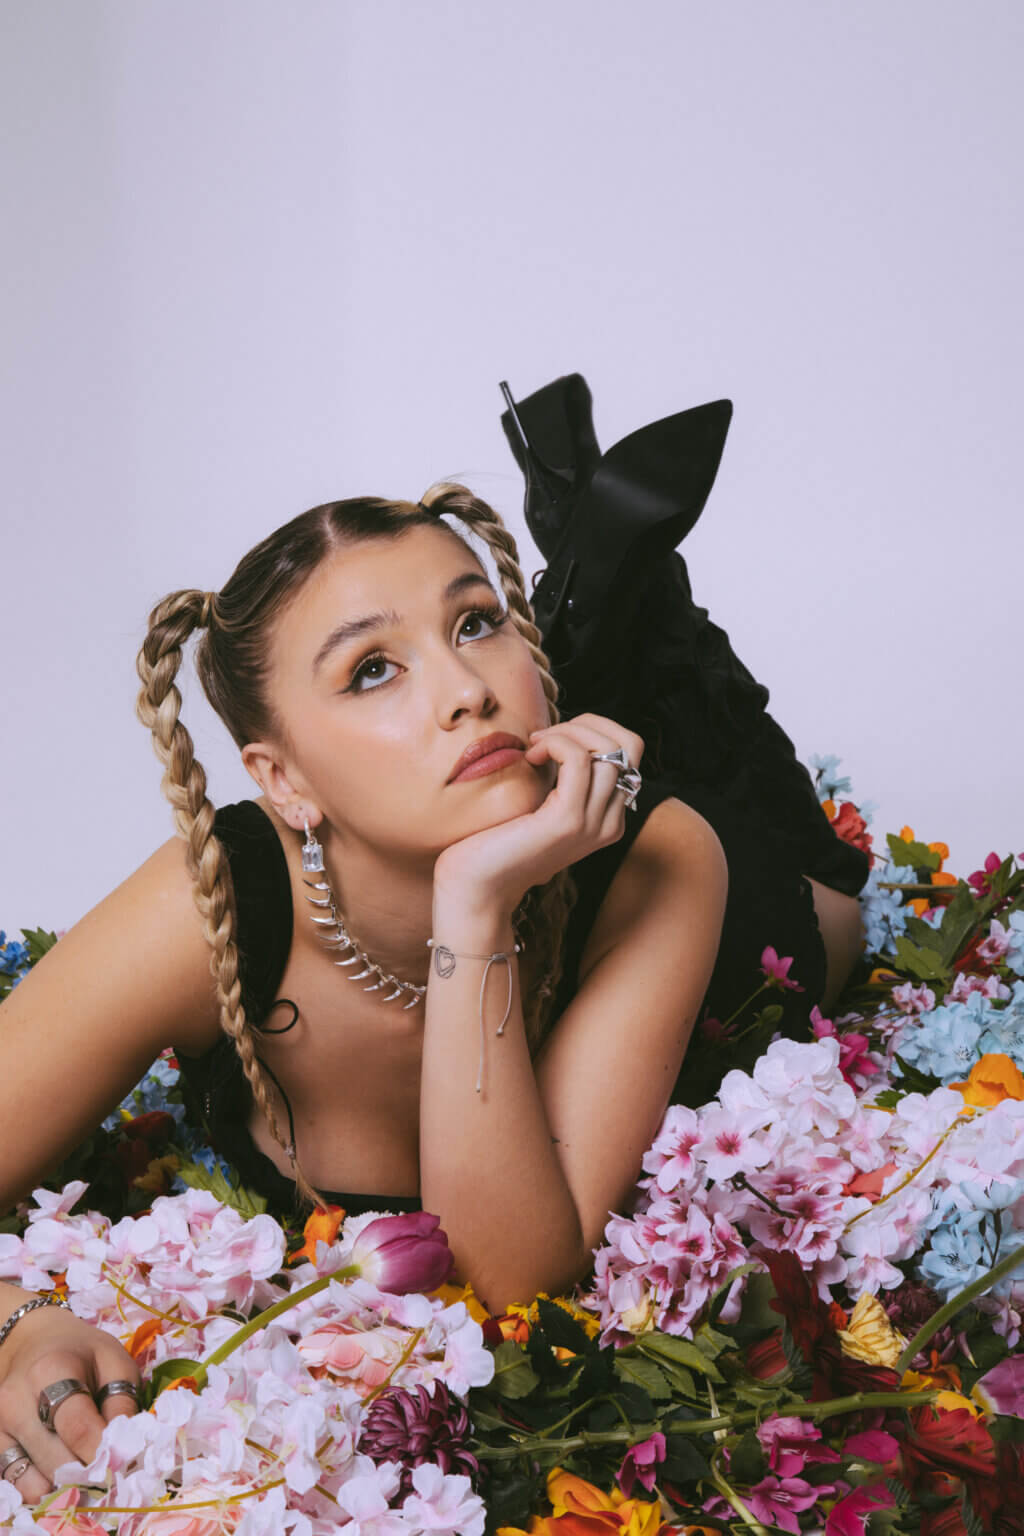 Caity Baser has announced the February 17 release of her new EP, Thanks For Nothing, See You Never via EMI/Chosen Music. With the news she shares the latest teaser of the EP by way of new single “2020s.”